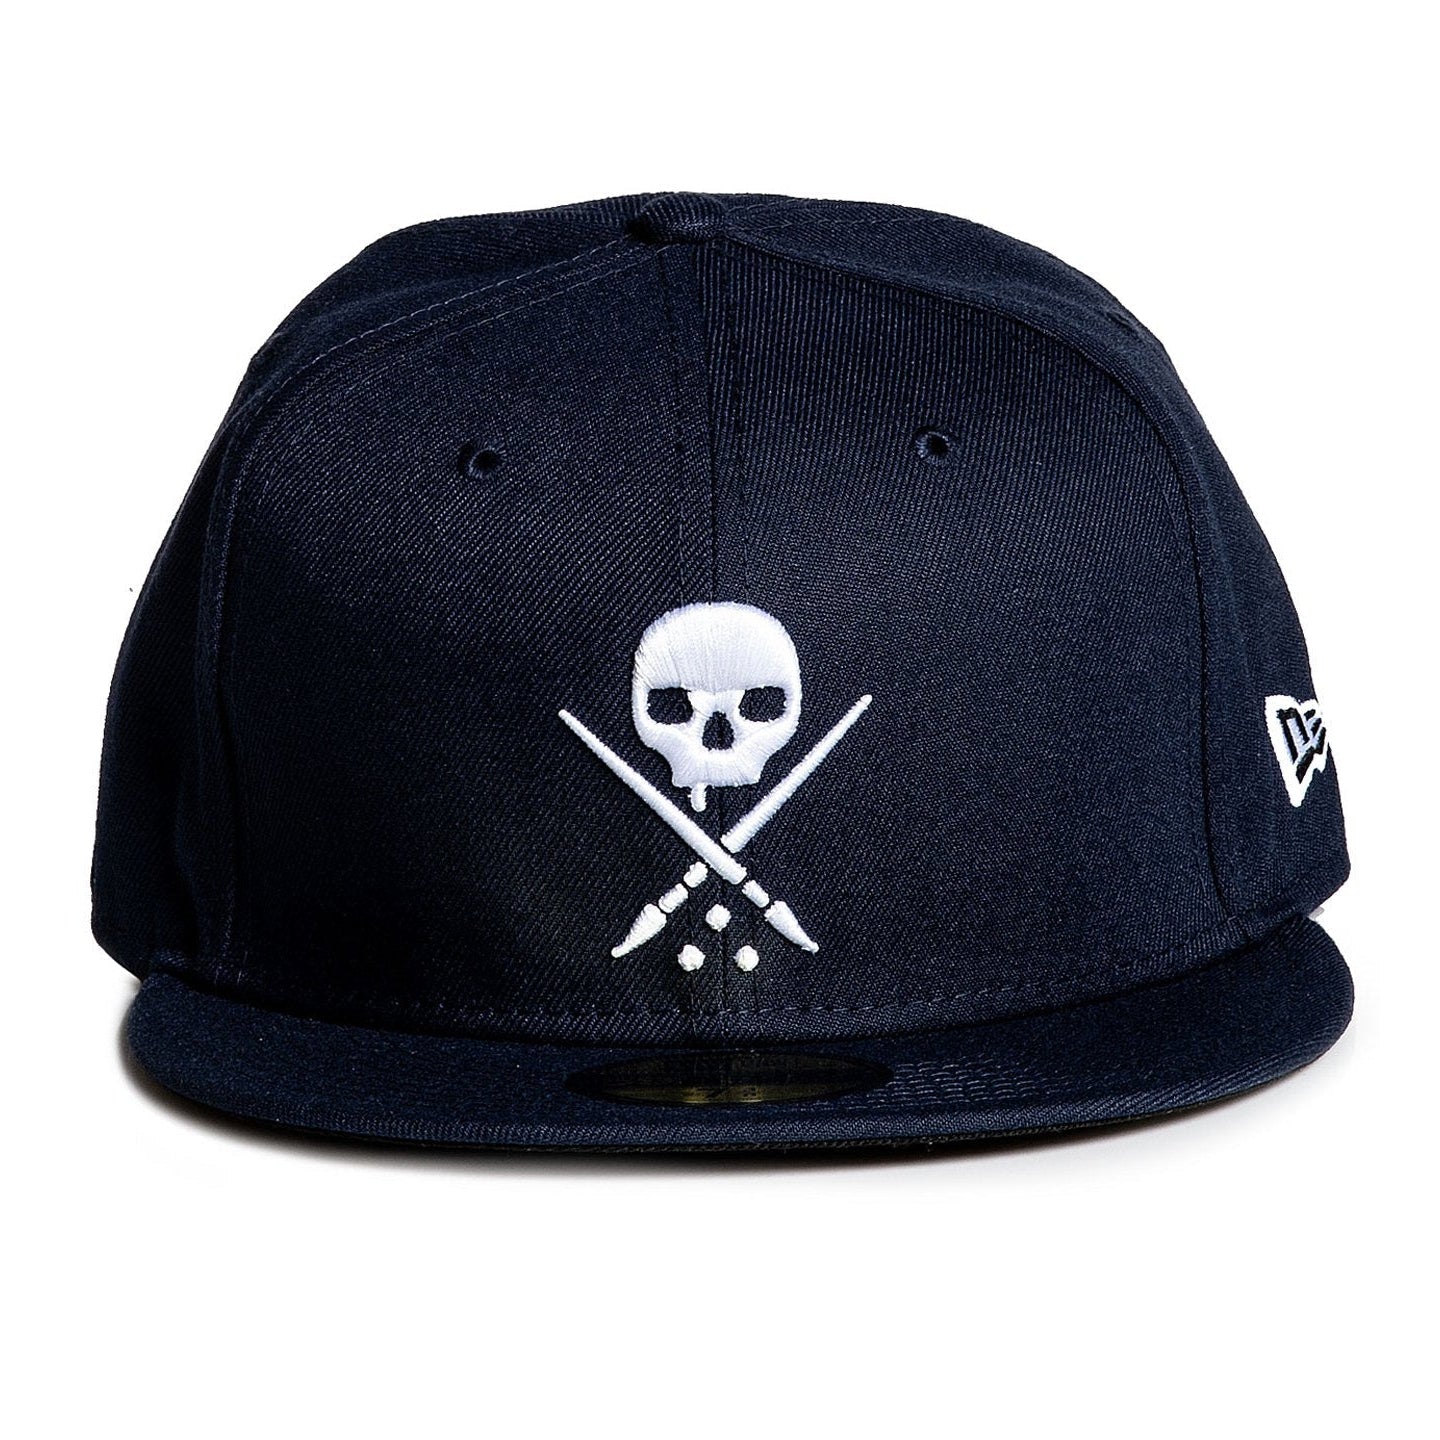 Sullen Badge Navy Stretched Fitted Cap-Mens Beanies, Hats & Snapback Caps-Scarlett Dawn